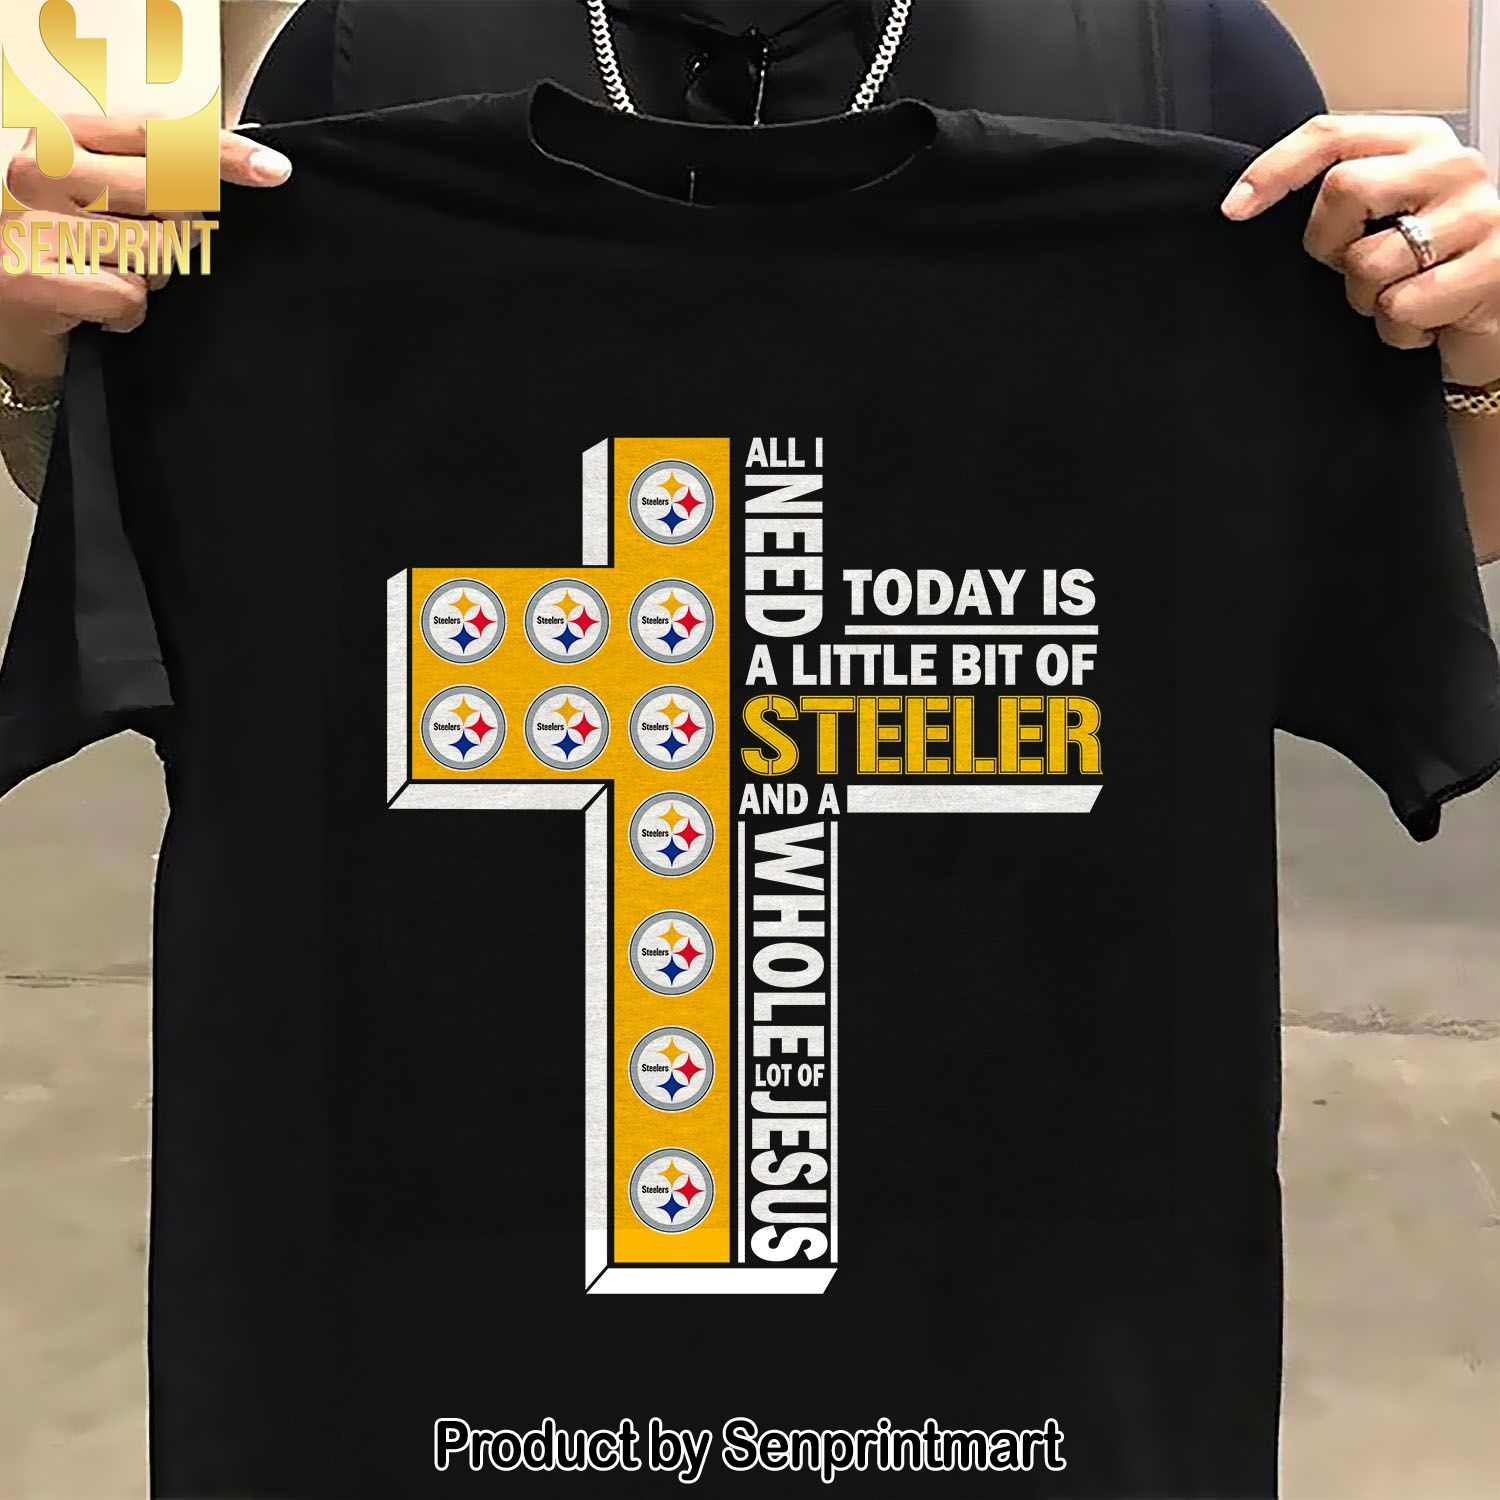 National Football League Pittsburgh Steelers All I Need Today Is A Little Bit Of And Whole Lot Of Jesus New Fashion Sleeveless Jacket